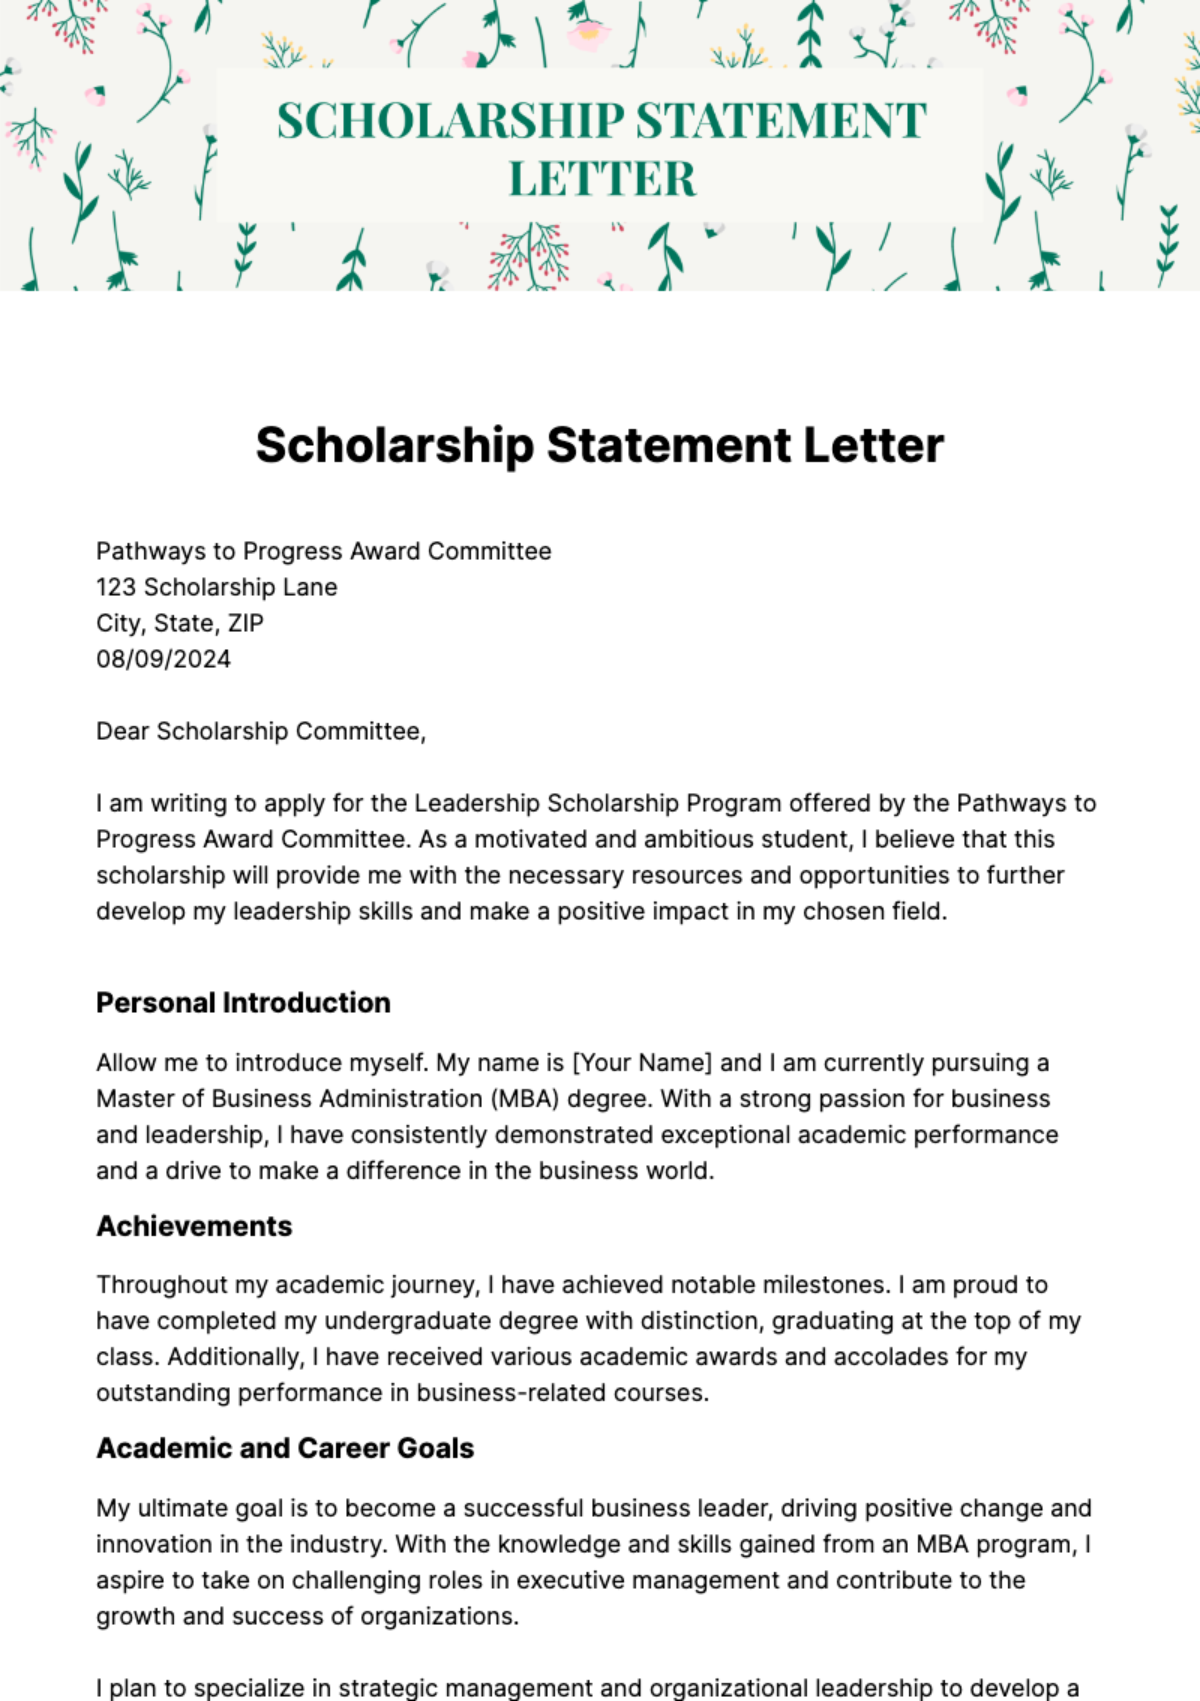 Free Scholarship Statement Letter Template